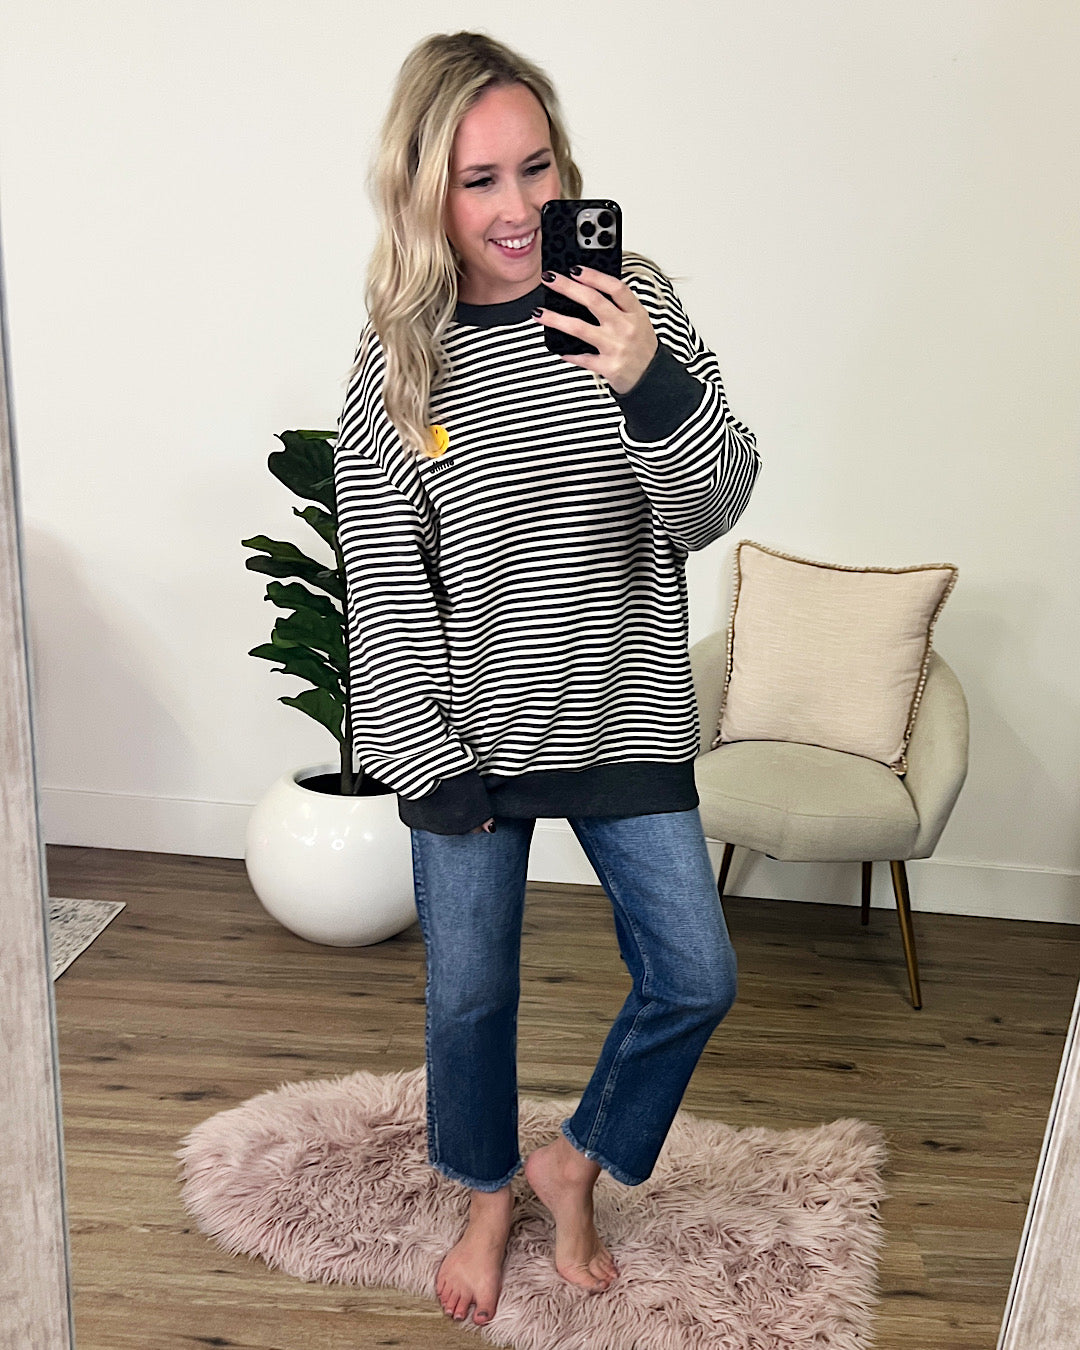 Smile Sweatshirt - Charcoal and Ivory Striped FINAL SALE  White Birch   